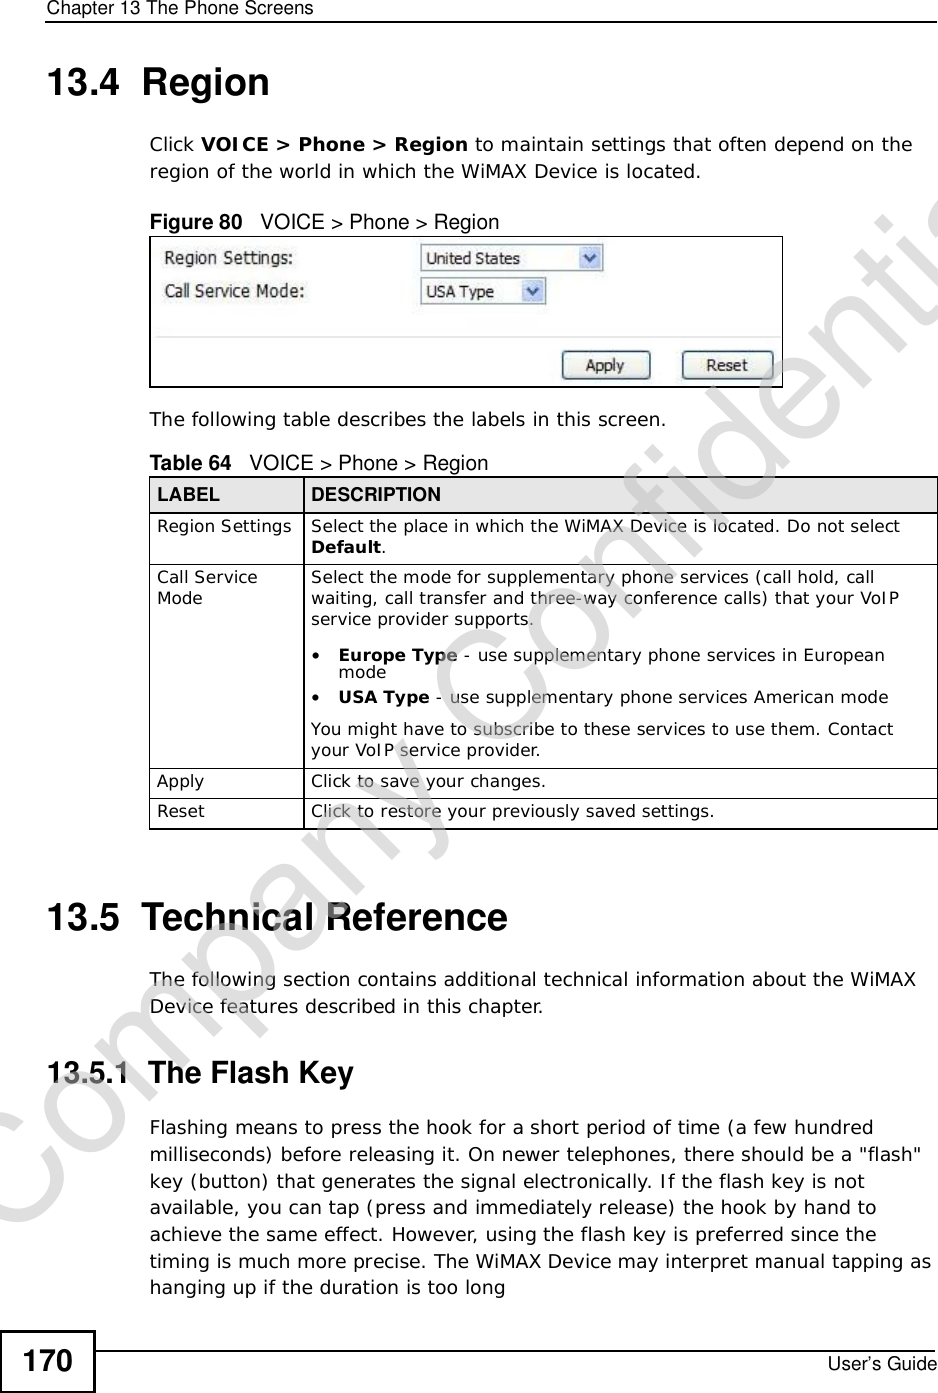 Chapter 13The Phone ScreensUser’s Guide17013.4  RegionClick VOICE &gt; Phone &gt; Region to maintain settings that often depend on the region of the world in which the WiMAX Device is located.Figure 80   VOICE &gt; Phone &gt; RegionThe following table describes the labels in this screen.13.5  Technical ReferenceThe following section contains additional technical information about the WiMAX Device features described in this chapter.13.5.1  The Flash KeyFlashing means to press the hook for a short period of time (a few hundred milliseconds) before releasing it. On newer telephones, there should be a &quot;flash&quot; key (button) that generates the signal electronically. If the flash key is not available, you can tap (press and immediately release) the hook by hand to achieve the same effect. However, using the flash key is preferred since the timing is much more precise. The WiMAX Device may interpret manual tapping as hanging up if the duration is too longTable 64   VOICE &gt; Phone &gt; RegionLABEL DESCRIPTIONRegion Settings Select the place in which the WiMAX Device is located. Do not select Default.Call Service Mode Select the mode for supplementary phone services (call hold, call waiting, call transfer and three-way conference calls) that your VoIP service provider supports.•Europe Type - use supplementary phone services in European mode•USA Type - use supplementary phone services American modeYou might have to subscribe to these services to use them. Contact your VoIP service provider.Apply Click to save your changes.Reset Click to restore your previously saved settings.Company Confidential